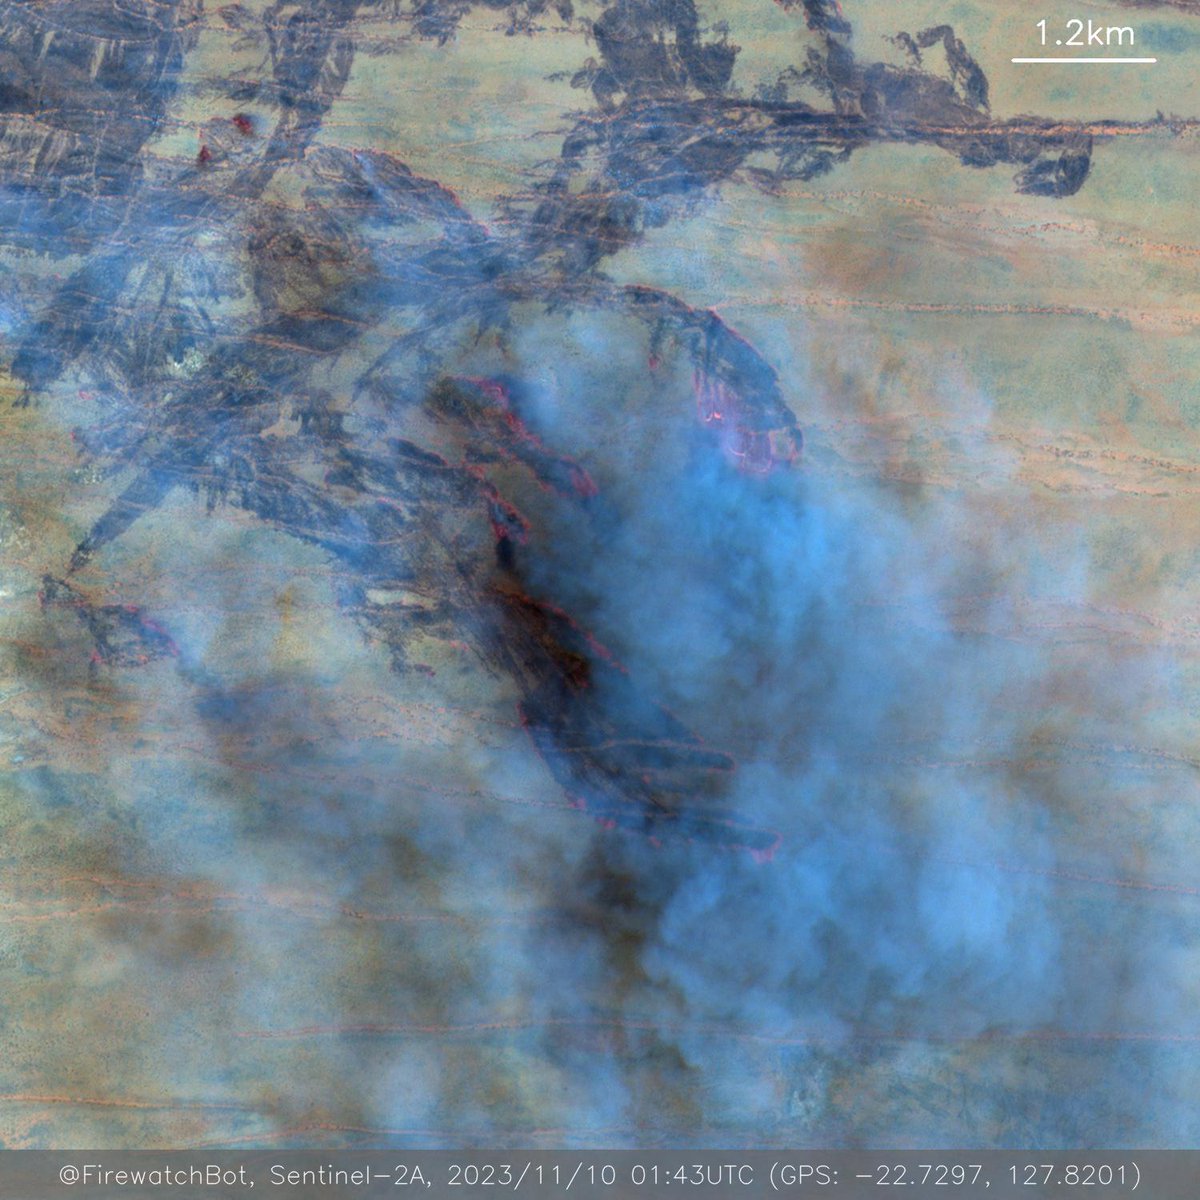 Fire detected from Sentinel2 Place: Shire of East Pilbara, Western Australia, Australia